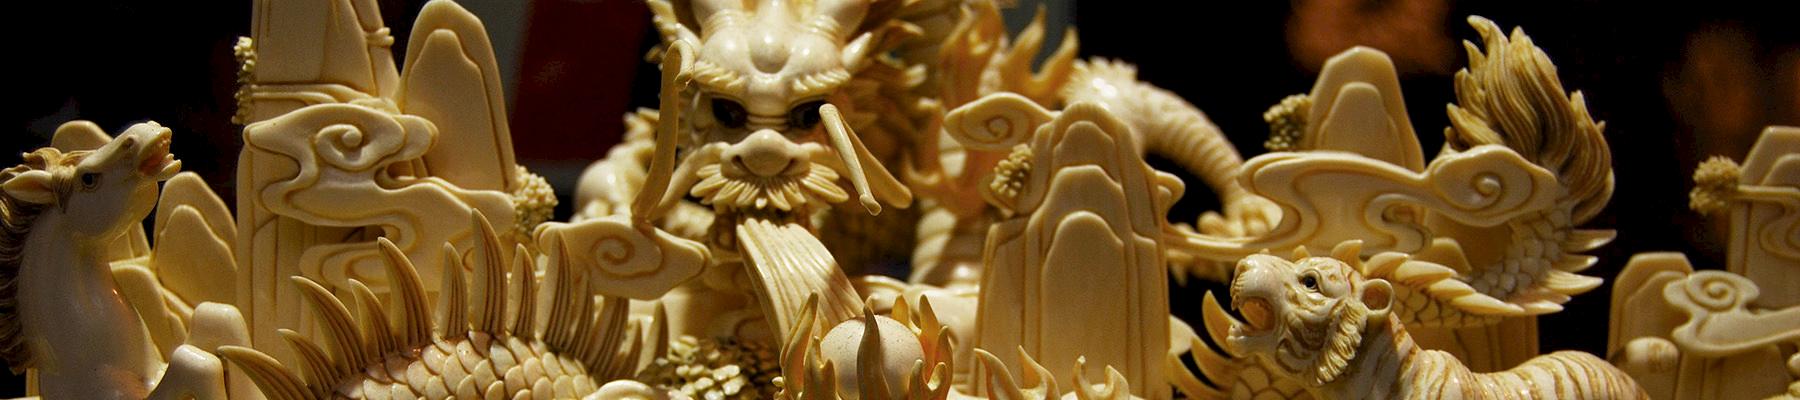 Ivory carvings on display at a shop in Hong Kong © vince42 / Generic CC 2.0